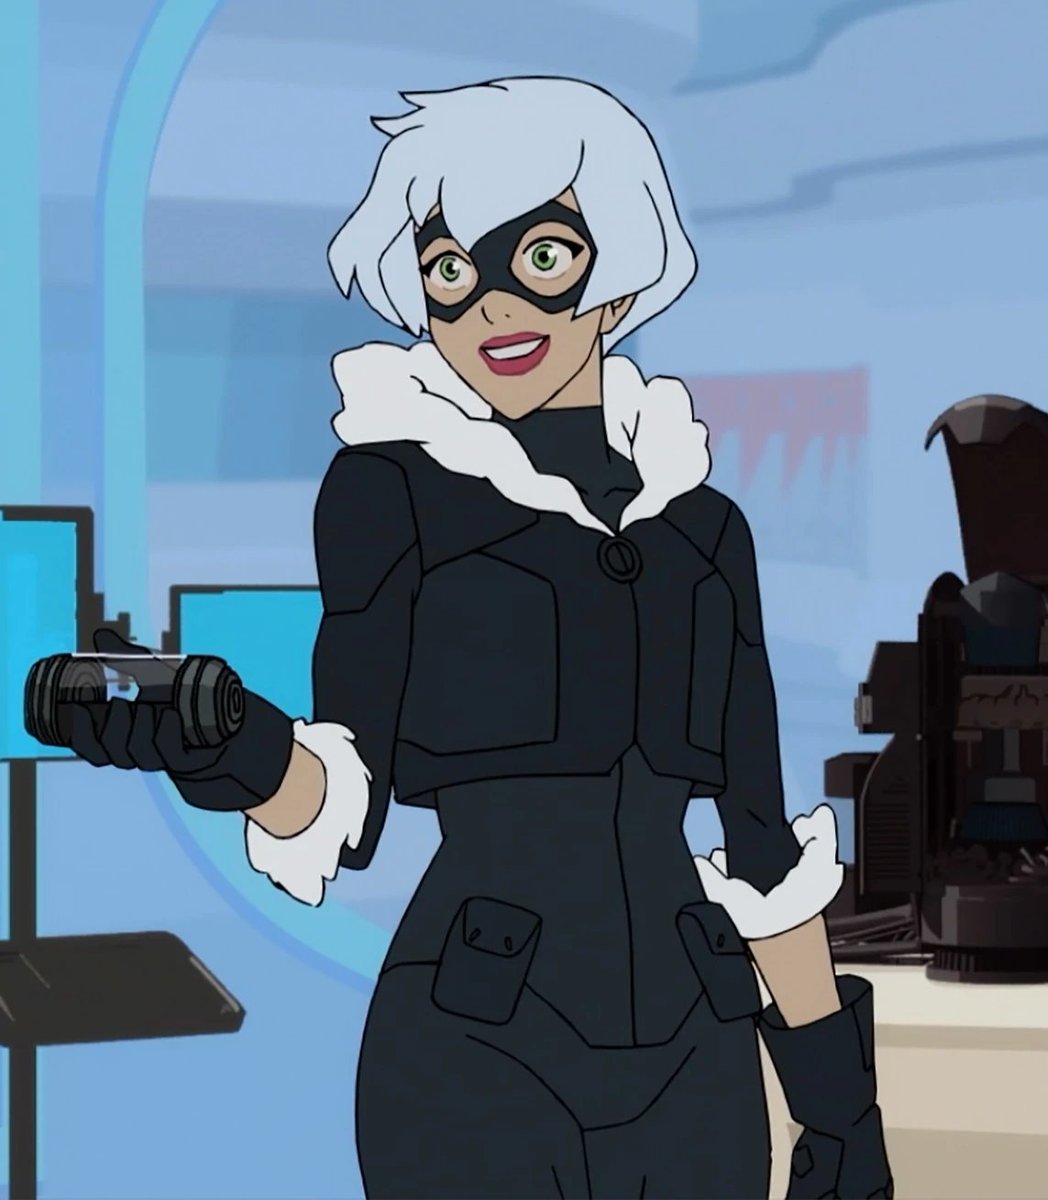 RT @EARTH_17628: Marvel's Spider-Man is Black Cat's first animated appearance since 